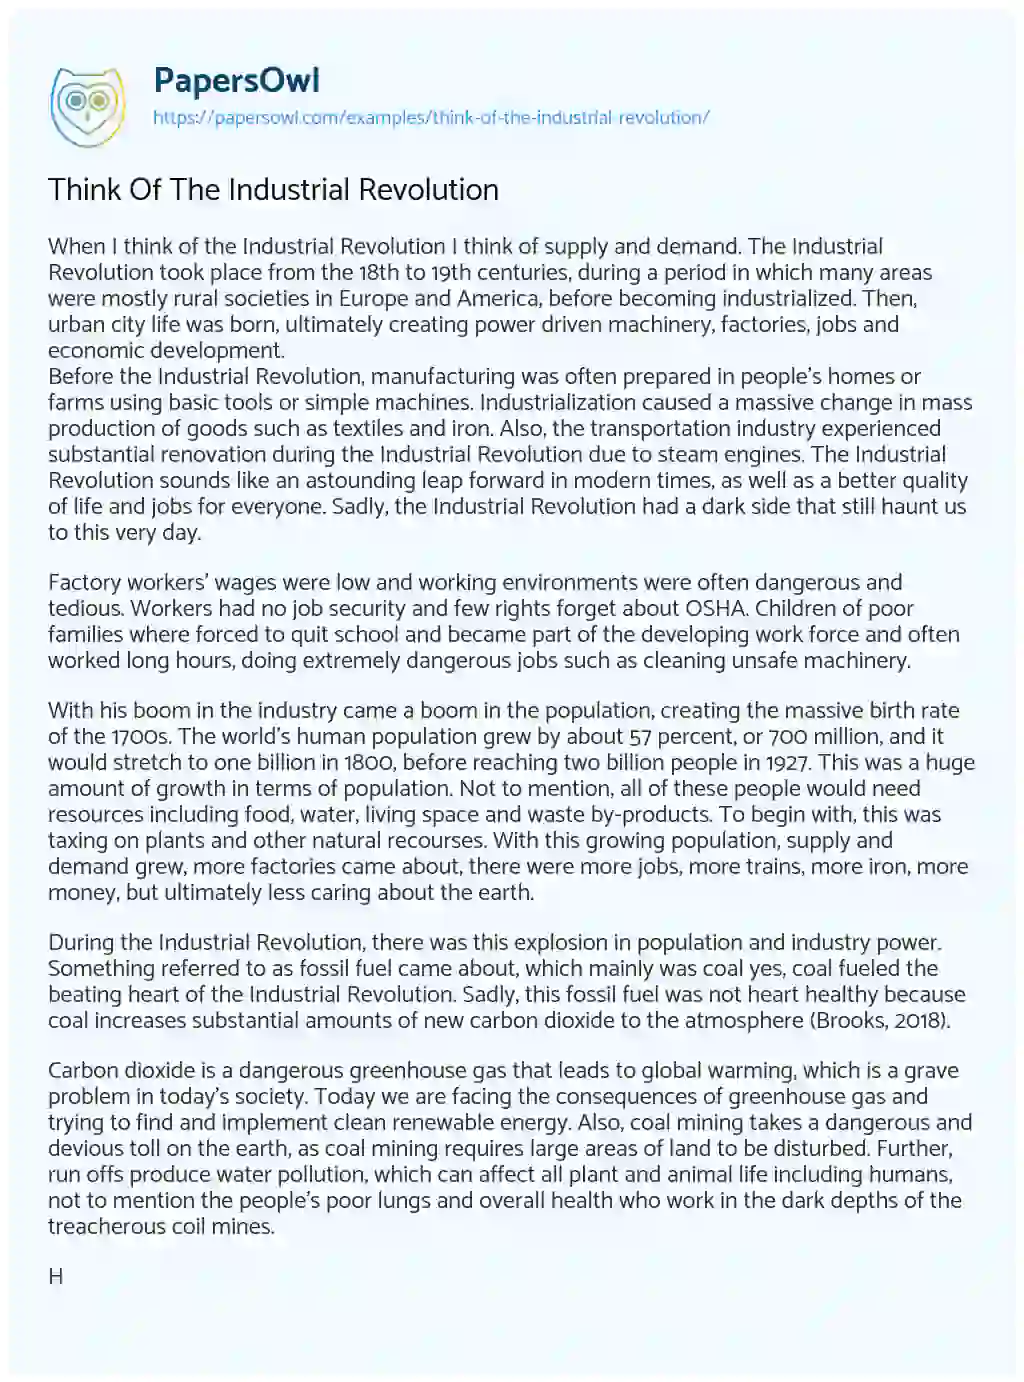 Essay on Think of the Industrial Revolution